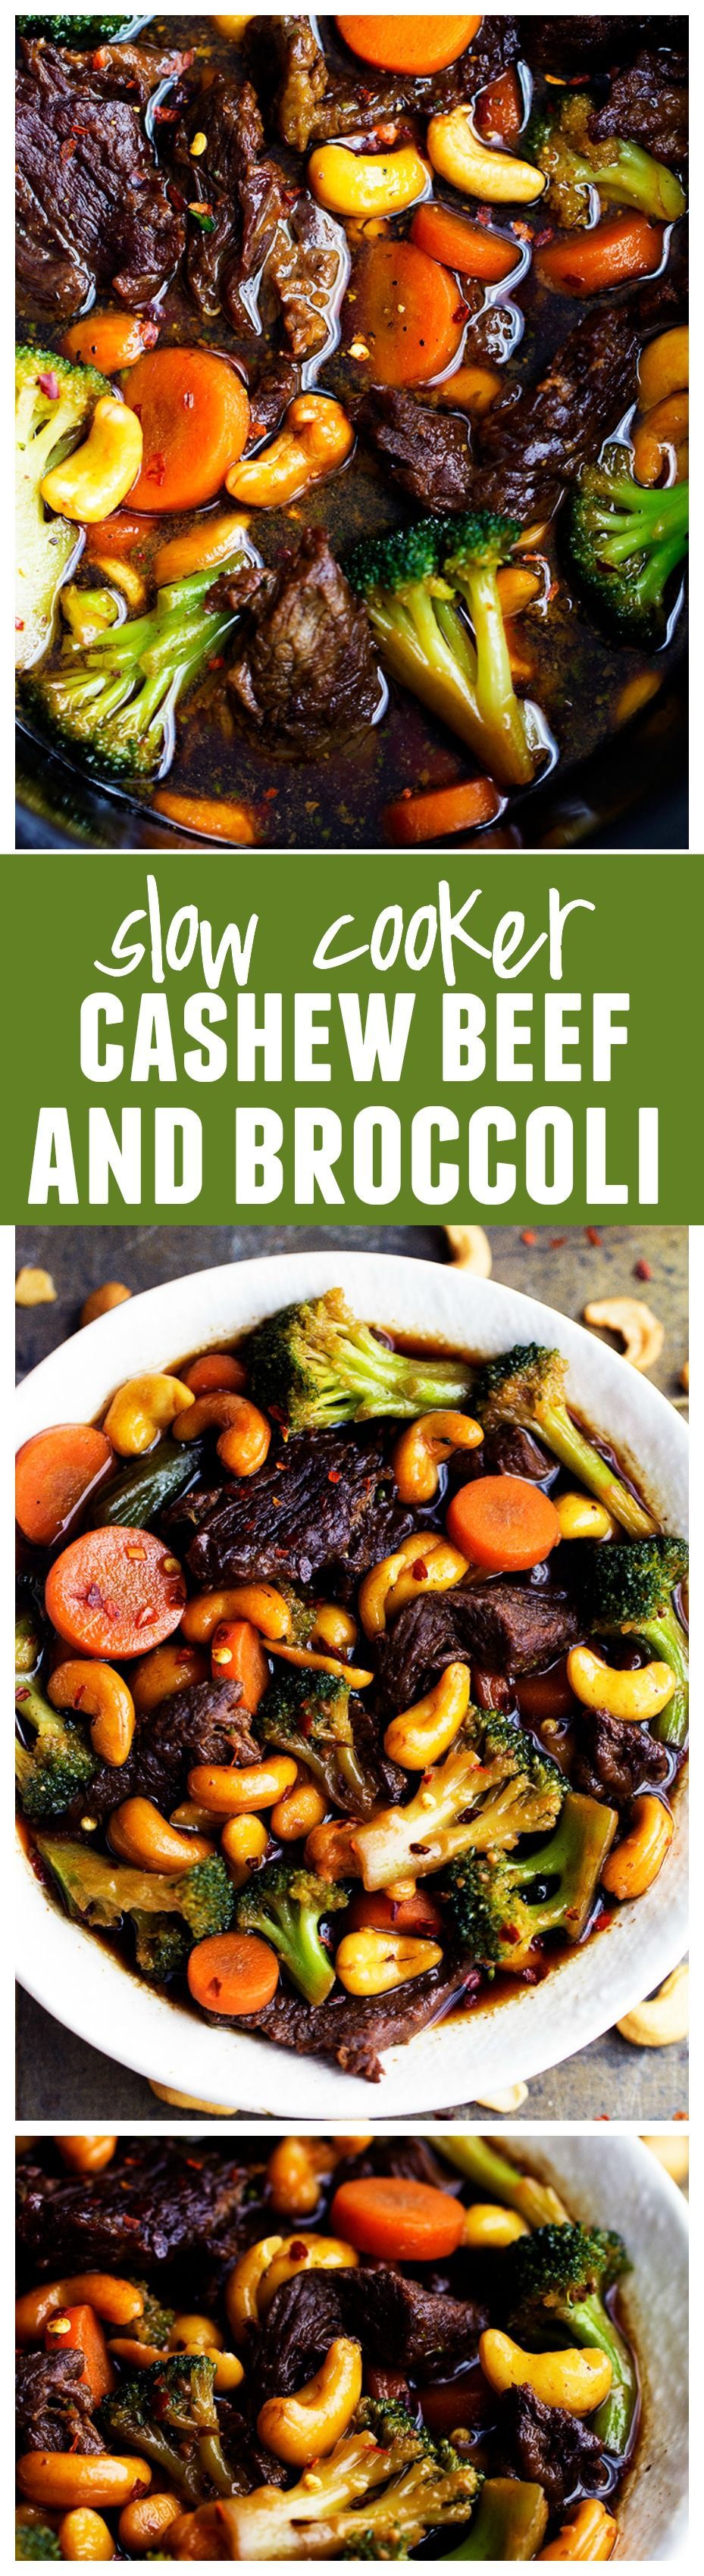 Delicious melt in your mouth beef that cooks right in your slow cooker with veggies and cashews hidden throughout. This will be